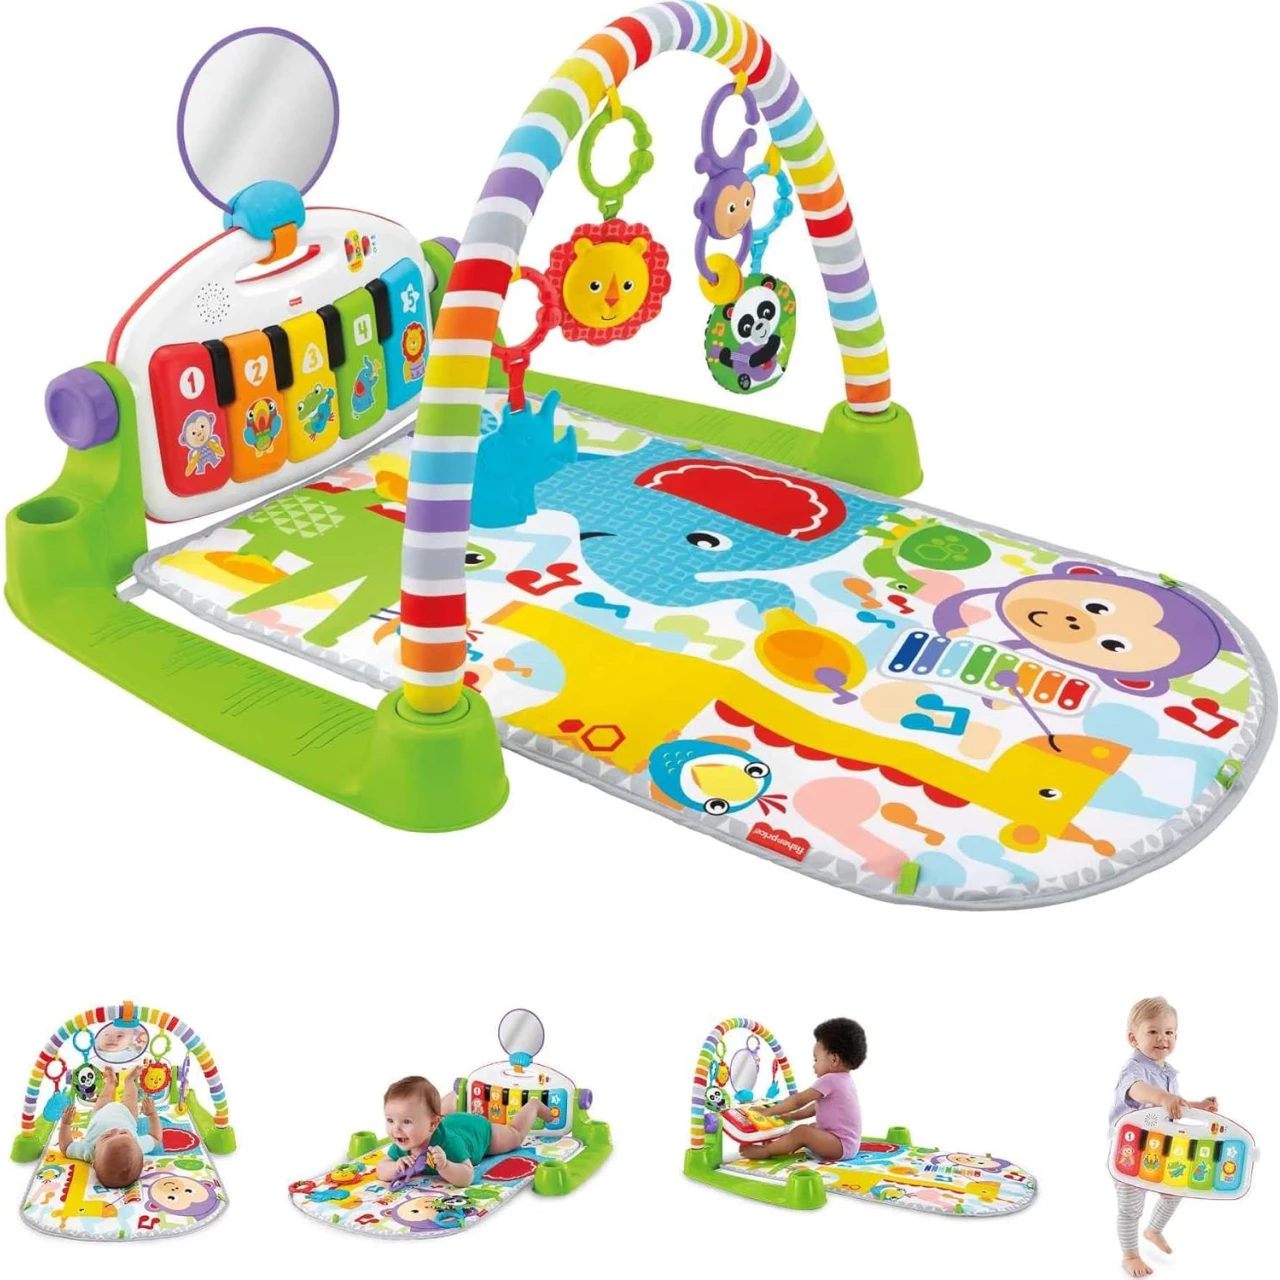 Fisher-Price Baby Playmat Deluxe Kick &amp; Play Piano Gym with Musical -Toy Lights &amp; Smart Stages Learning Content for Newborn to Toddler